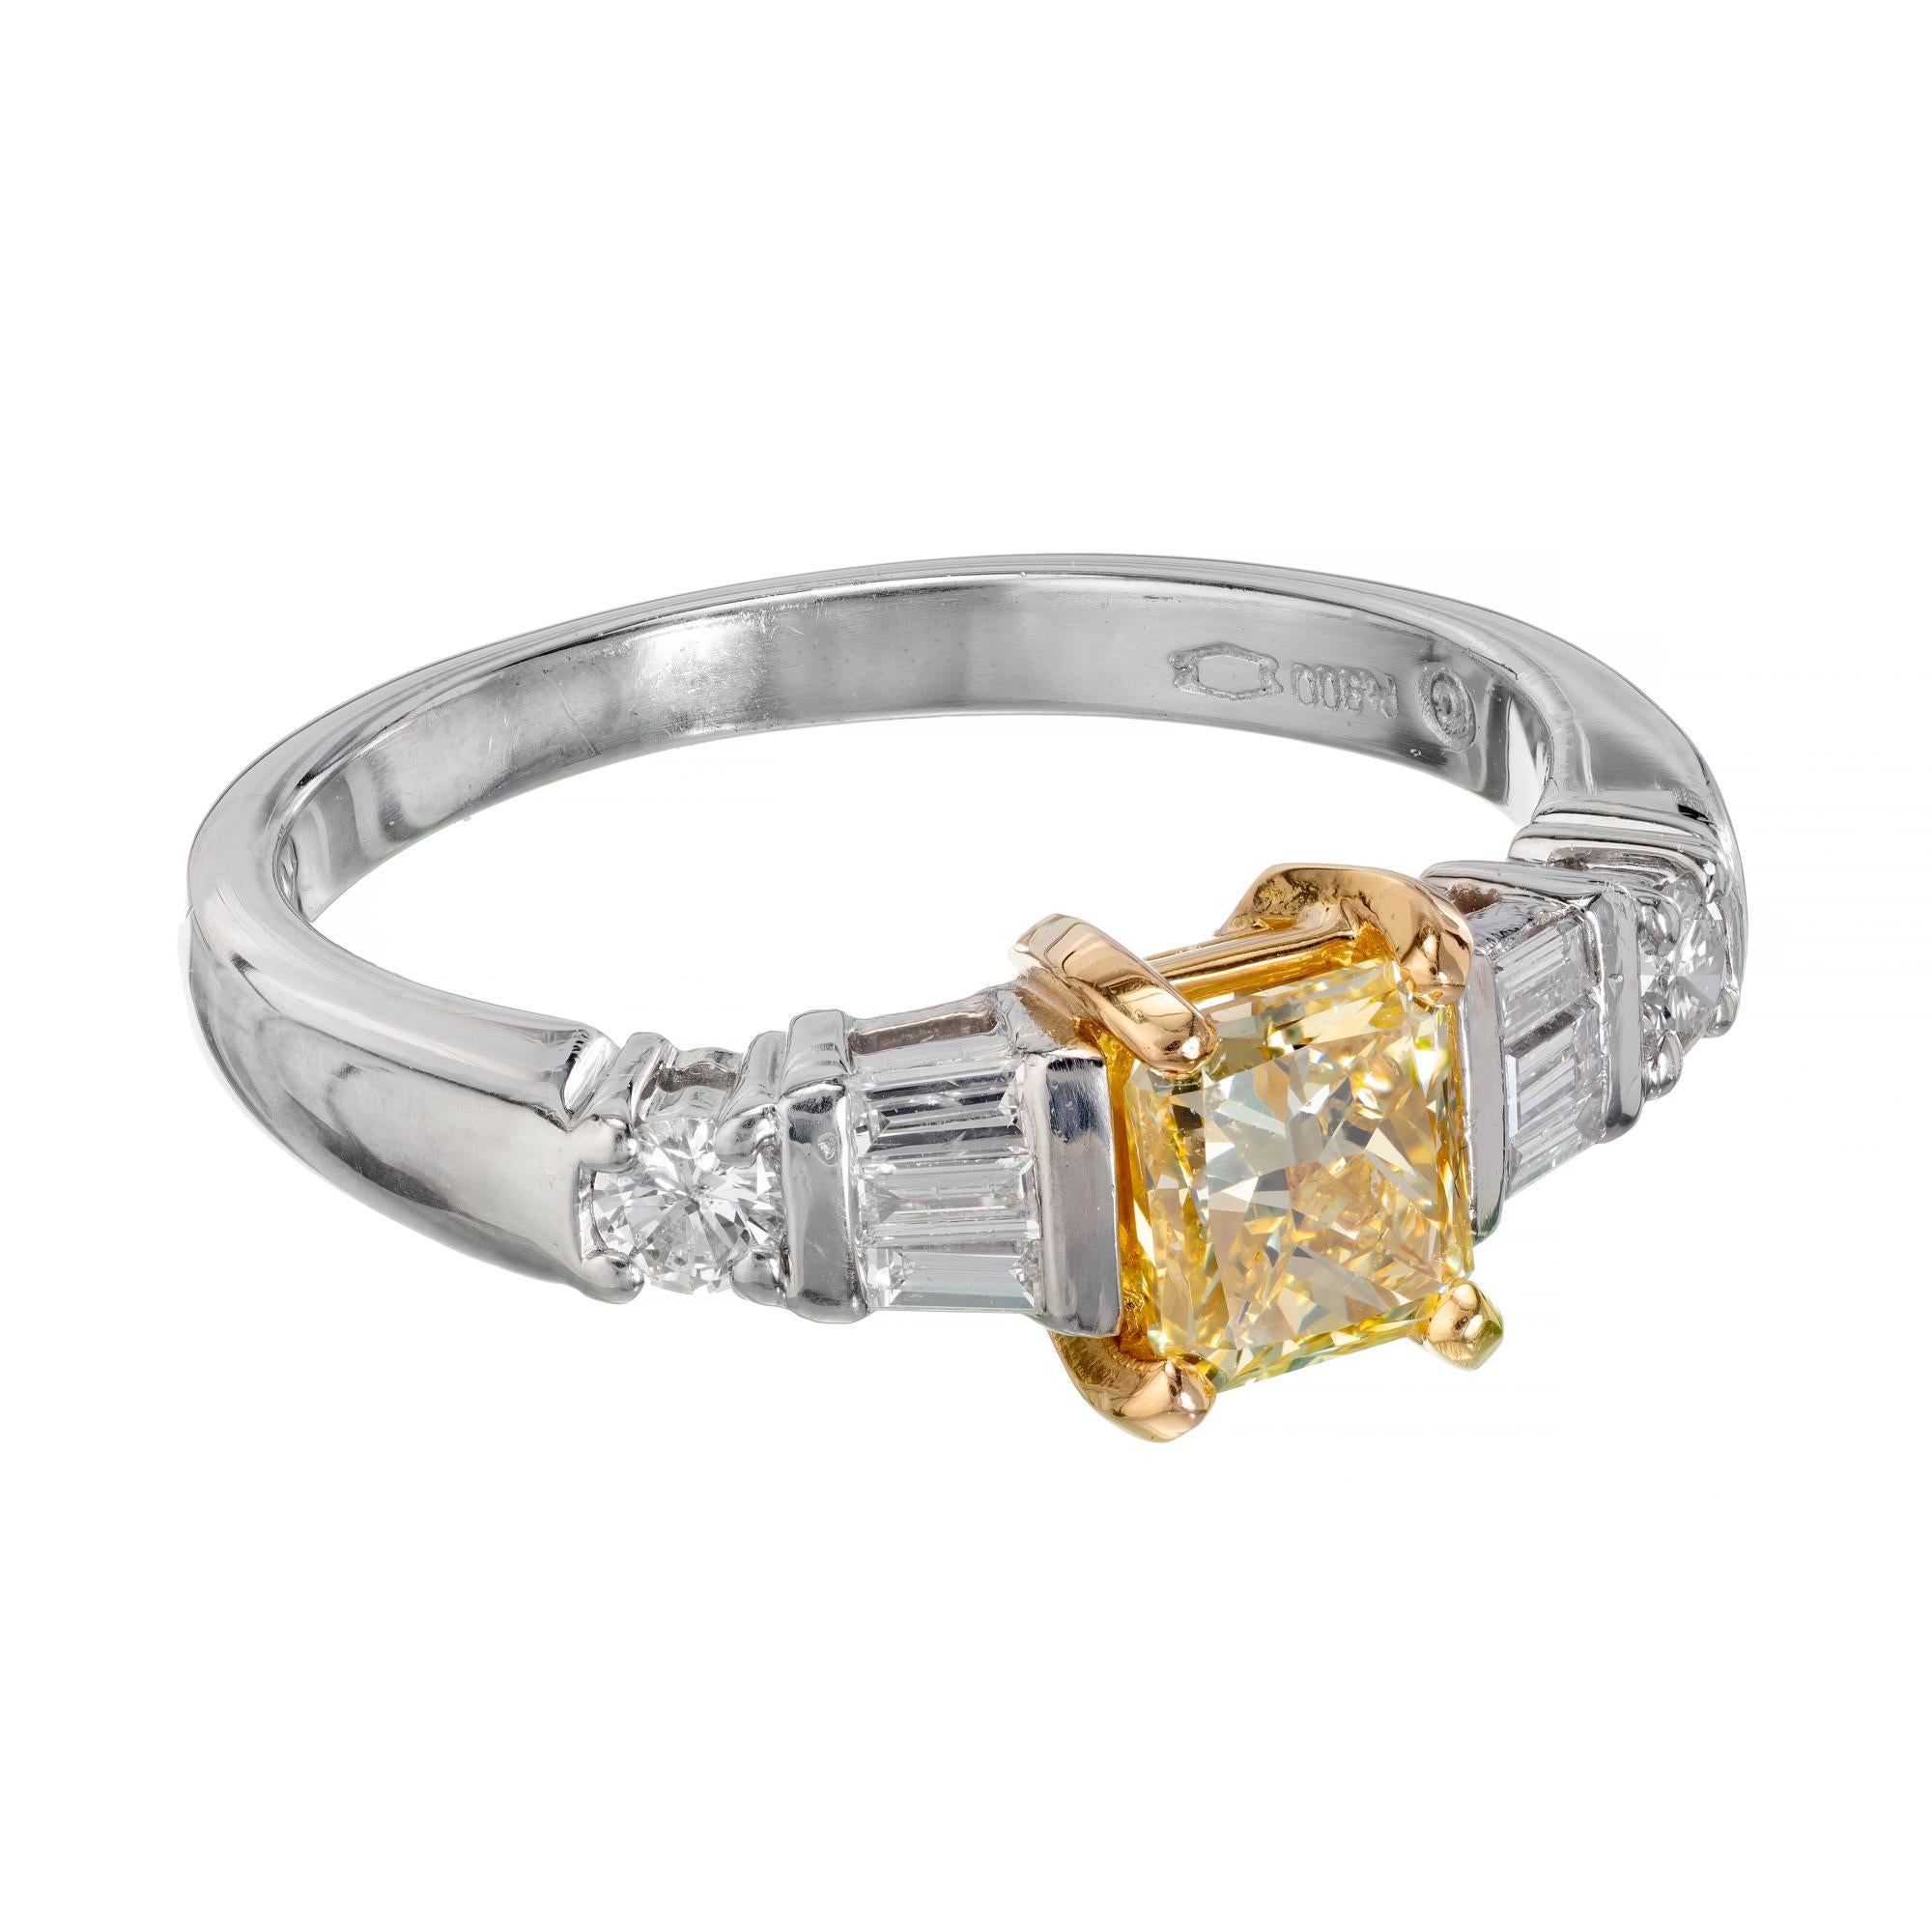 Yellow and white diamond engagement ring. Natural fancy intense radiant cut yellow rectangular diamond in a platinum and rose gold setting with baguette and round diamond accents. GIA certified. 

1 rectangular natural fancy Intense yellow SI